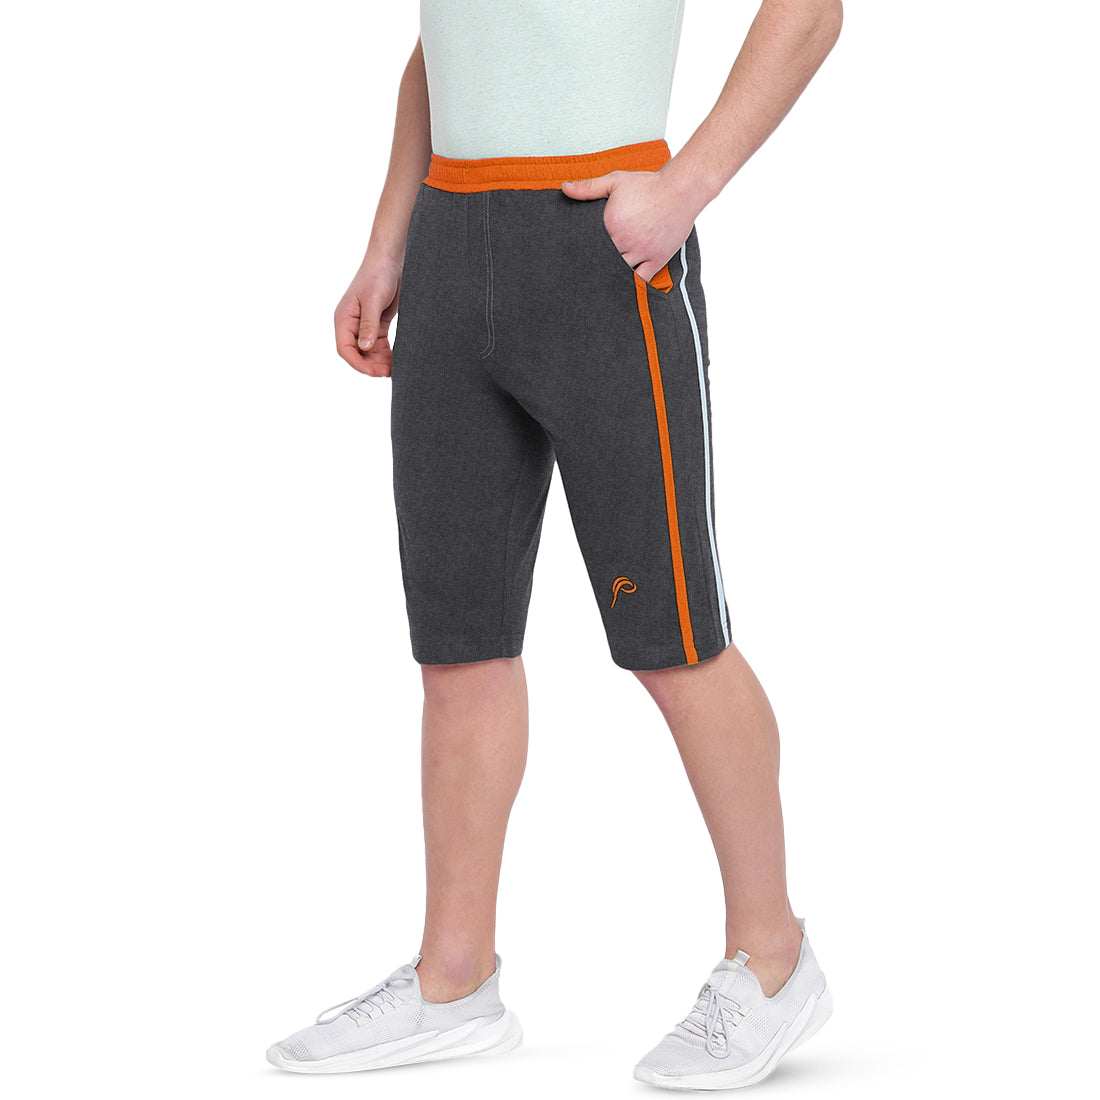 New arrivable poomer innerwear - Mayil's Selection